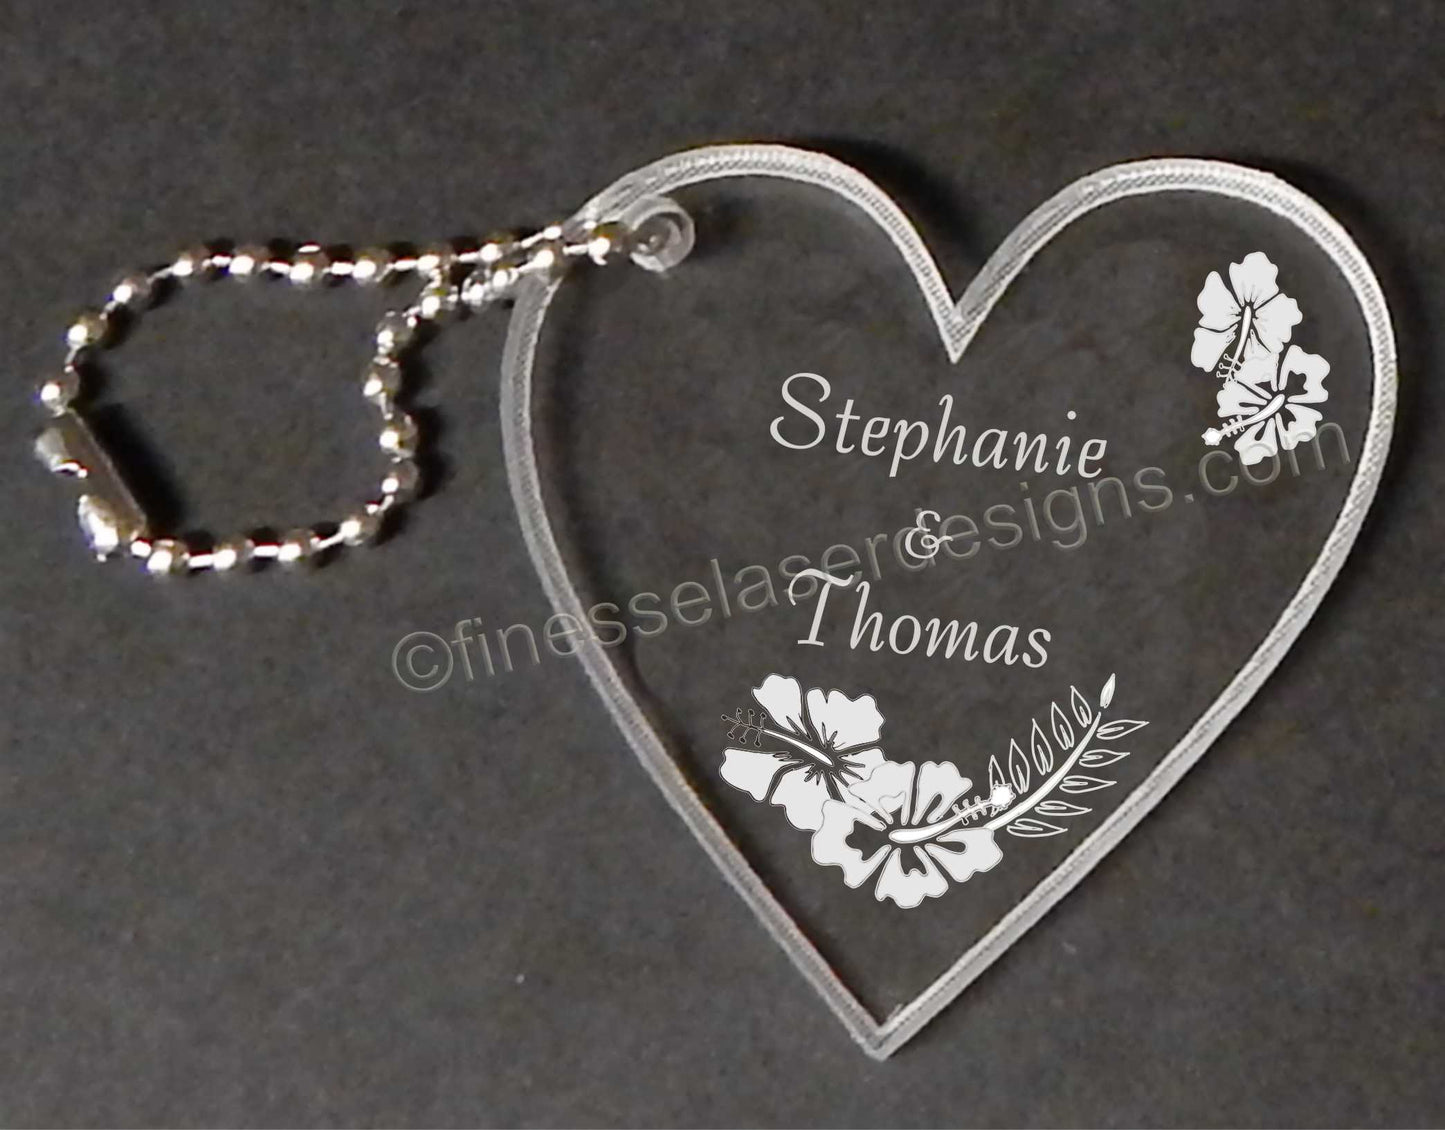 an acrylic heart shaped key chian with an hibisuc flower design and names engraved with a small metal chain attached